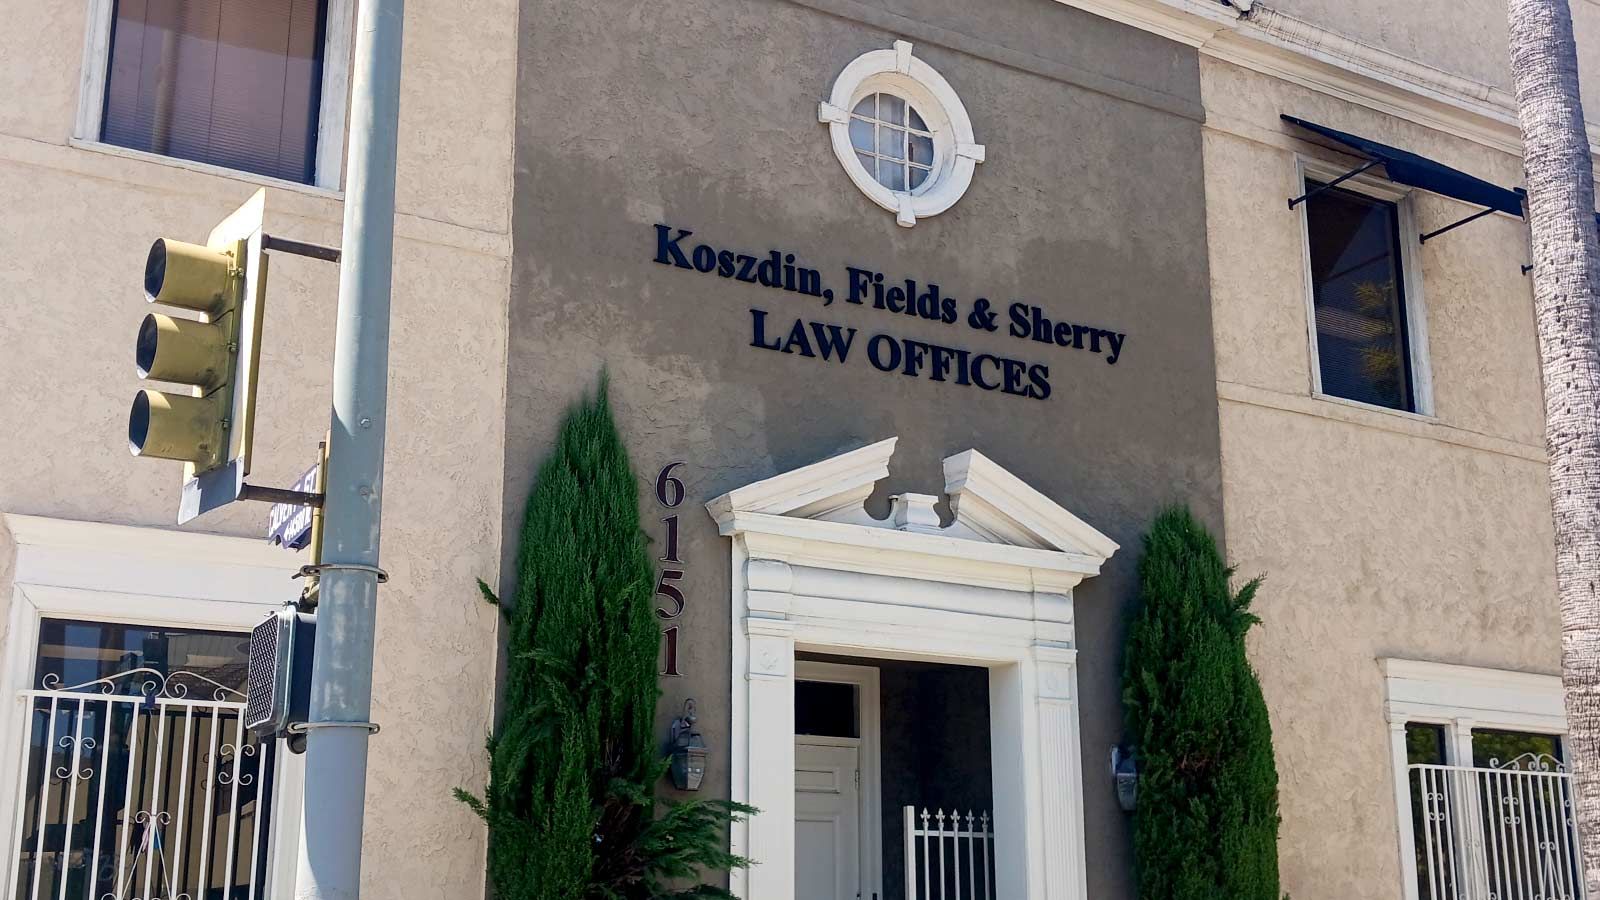 Koszdin, Fields & Sherry building sign mounted on a facade